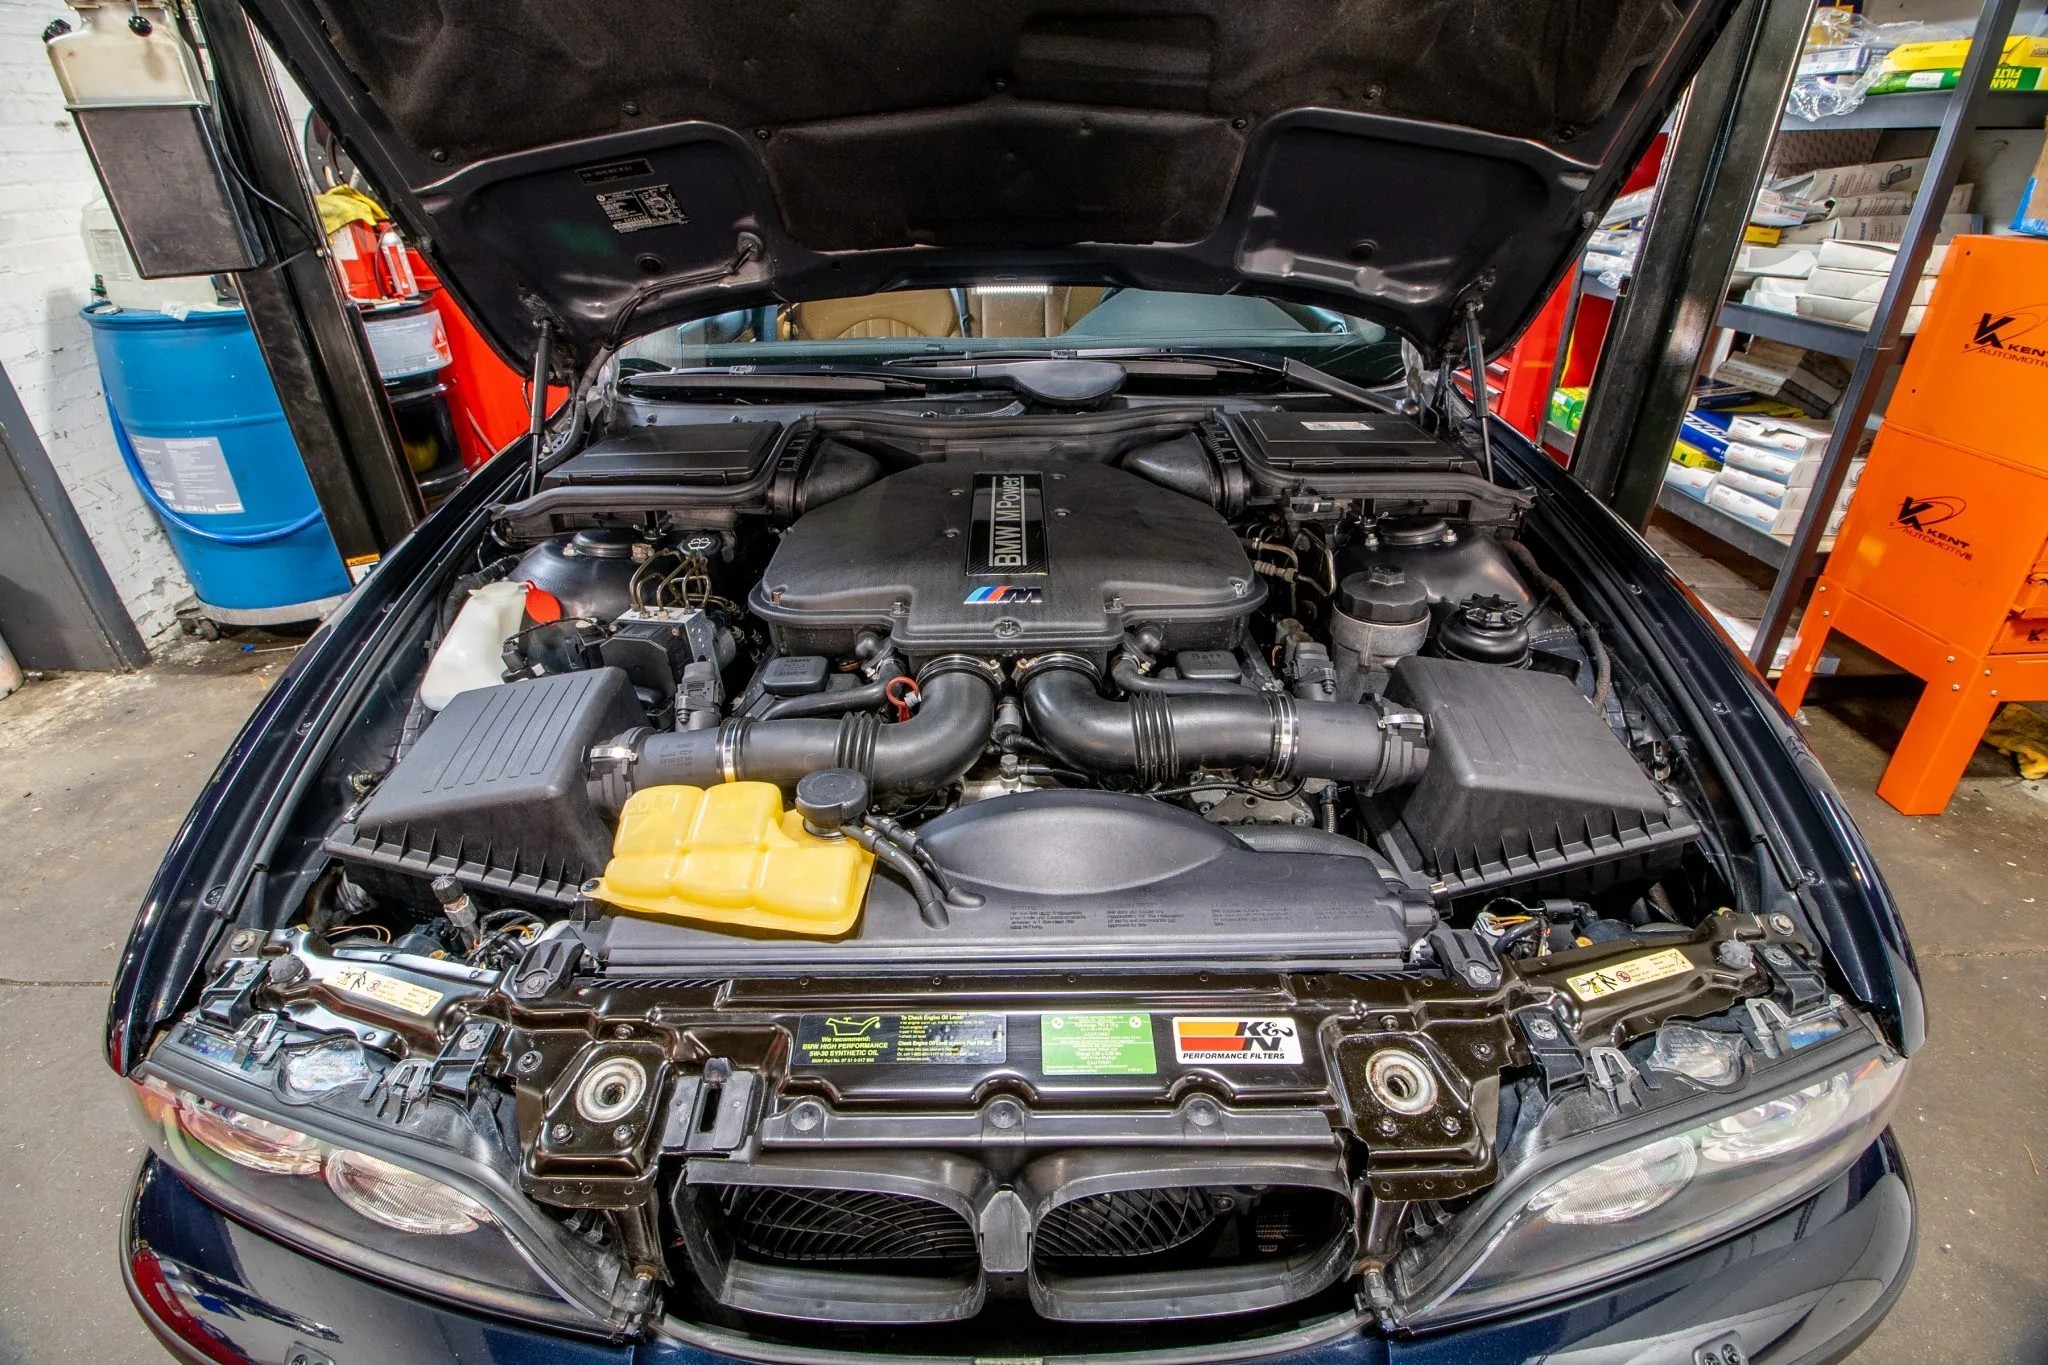 This 2001 Low-Mile BMW E39 M5 Is the Ultimate Go-Fast Sedan - autoevolution